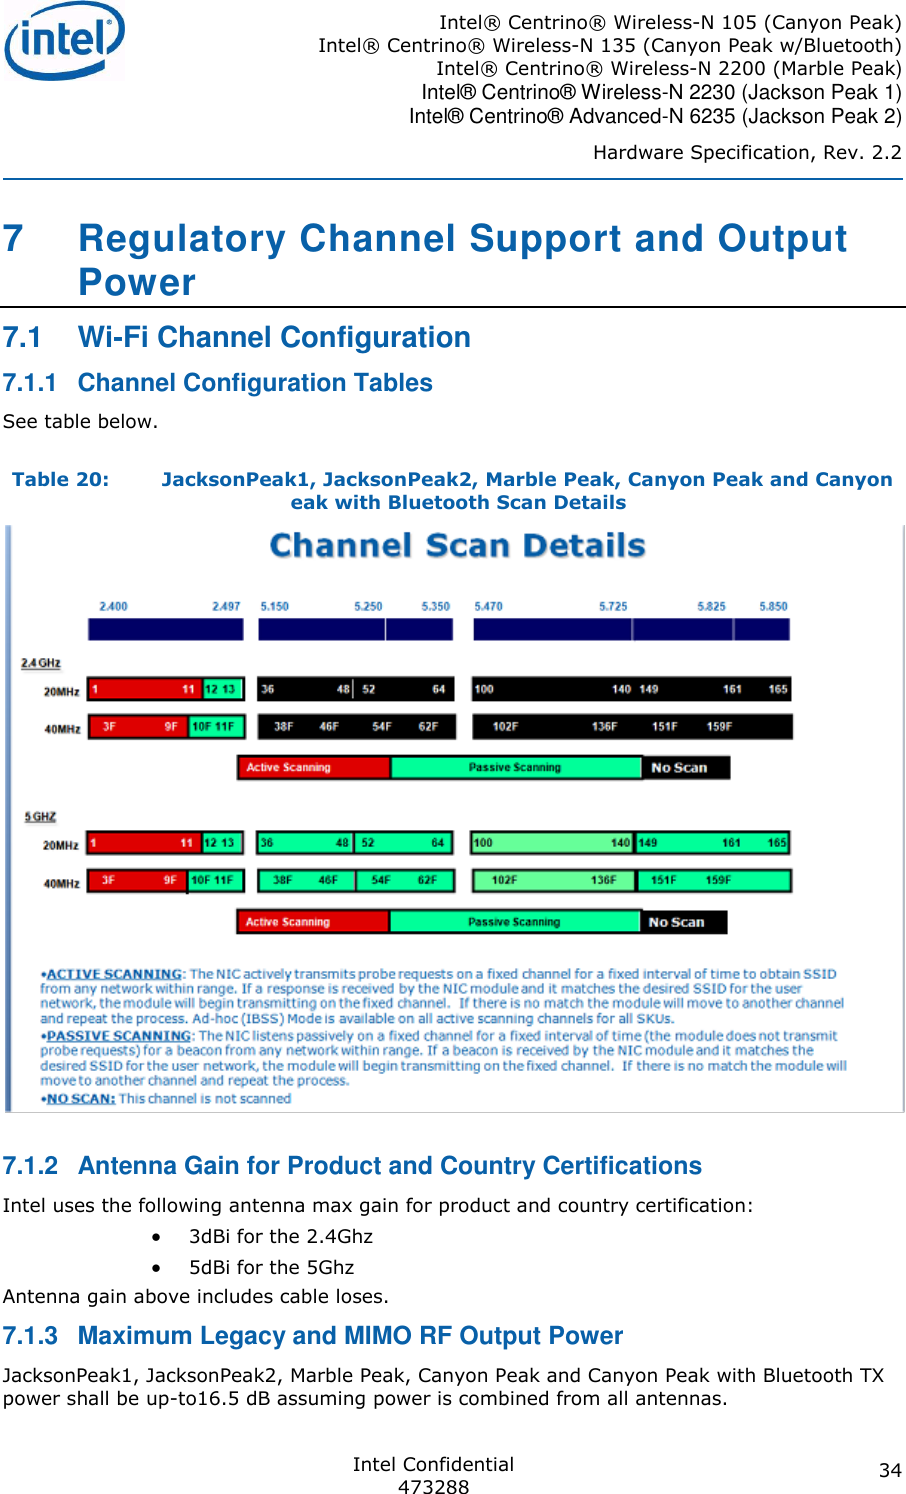 Intel® Centrino® Wireless-N 105 (Canyon Peak) Intel® Centrino® Wireless-N 135 (Canyon Peak w/Bluetooth) Intel® Centrino® Wireless-N 2200 (Marble Peak)  Intel® Centrino® Wireless-N 2230 (Jackson Peak 1) Intel® Centrino® Advanced-N 6235 (Jackson Peak 2) Hardware Specification, Rev. 2.2  Intel Confidential 473288 34 7  Regulatory Channel Support and Output Power  7.1  Wi-Fi Channel Configuration 7.1.1  Channel Configuration Tables See table below. Table 20: JacksonPeak1, JacksonPeak2, Marble Peak, Canyon Peak and Canyon eak with Bluetooth Scan Details  7.1.2  Antenna Gain for Product and Country Certifications Intel uses the following antenna max gain for product and country certification:  3dBi for the 2.4Ghz  5dBi for the 5Ghz Antenna gain above includes cable loses. 7.1.3  Maximum Legacy and MIMO RF Output Power JacksonPeak1, JacksonPeak2, Marble Peak, Canyon Peak and Canyon Peak with Bluetooth TX power shall be up-to16.5 dB assuming power is combined from all antennas. 